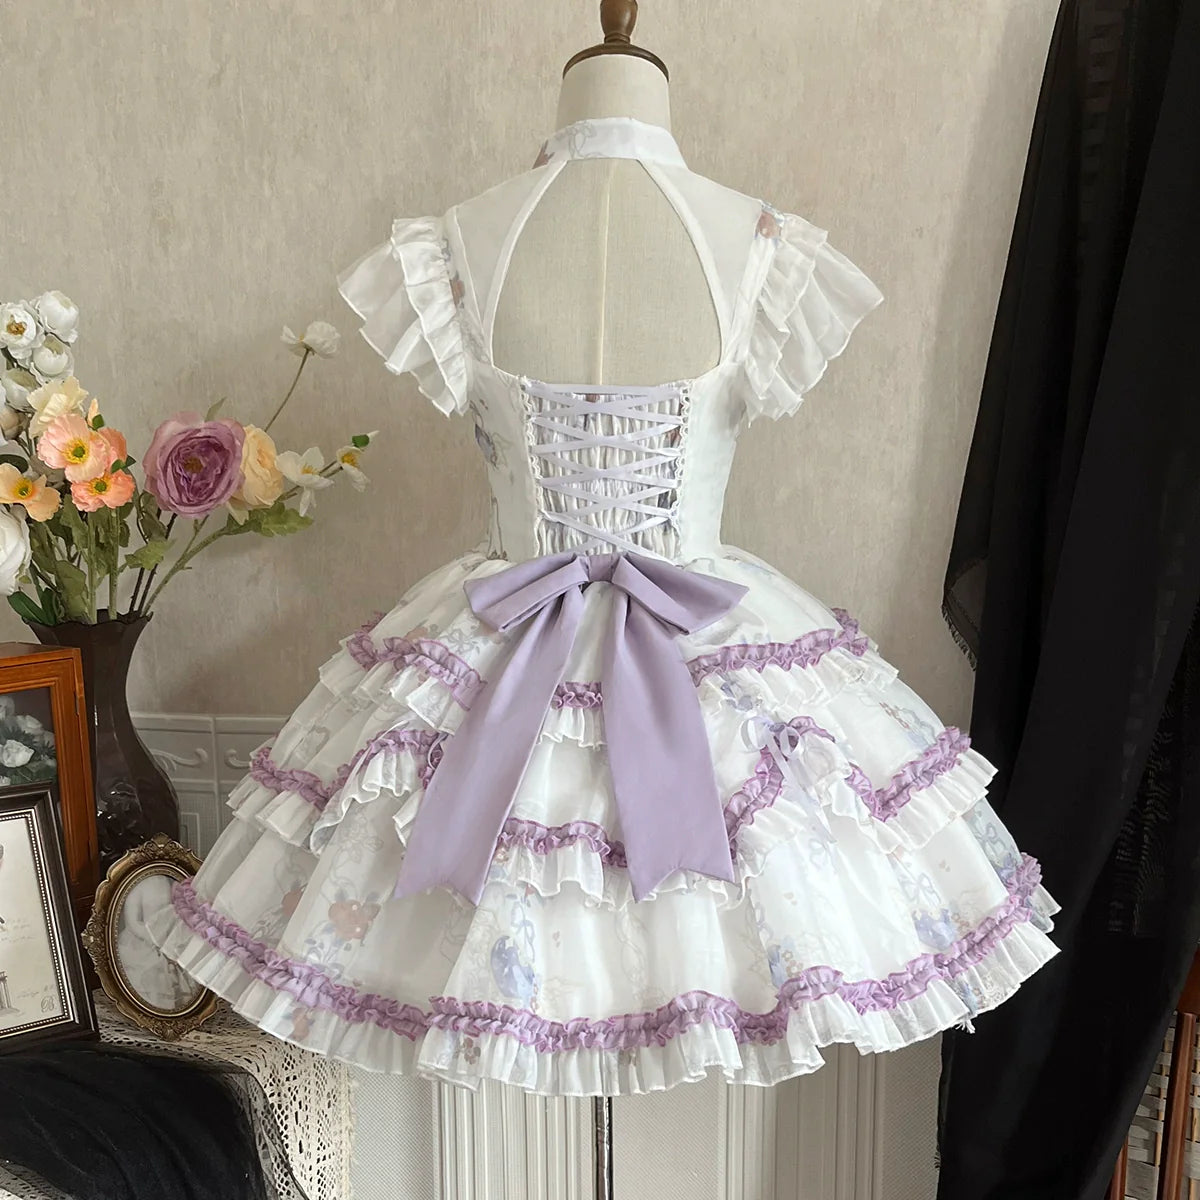 Angel Devil Purple line 3-tier dress with flowers and ribbons